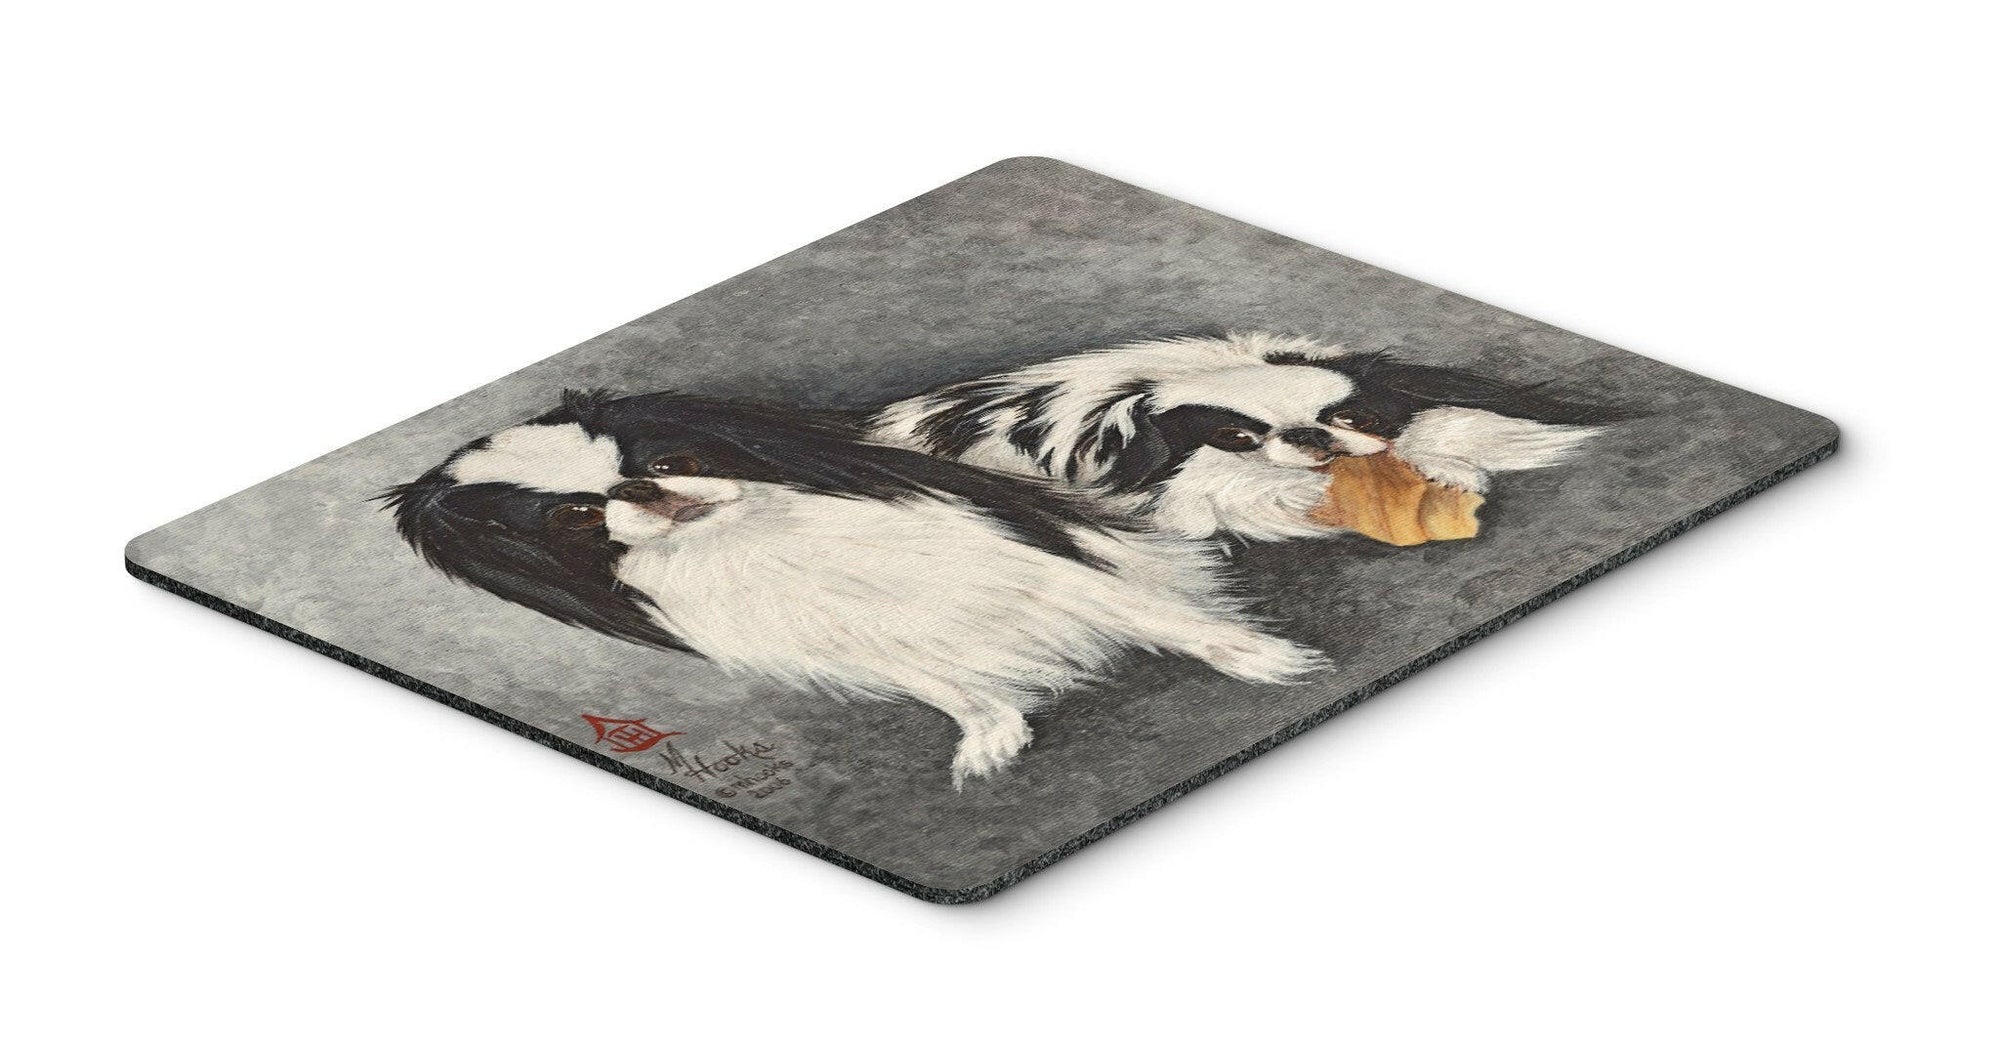 Japanese Chin Impress Mouse Pad, Hot Pad or Trivet MH1050MP by Caroline's Treasures